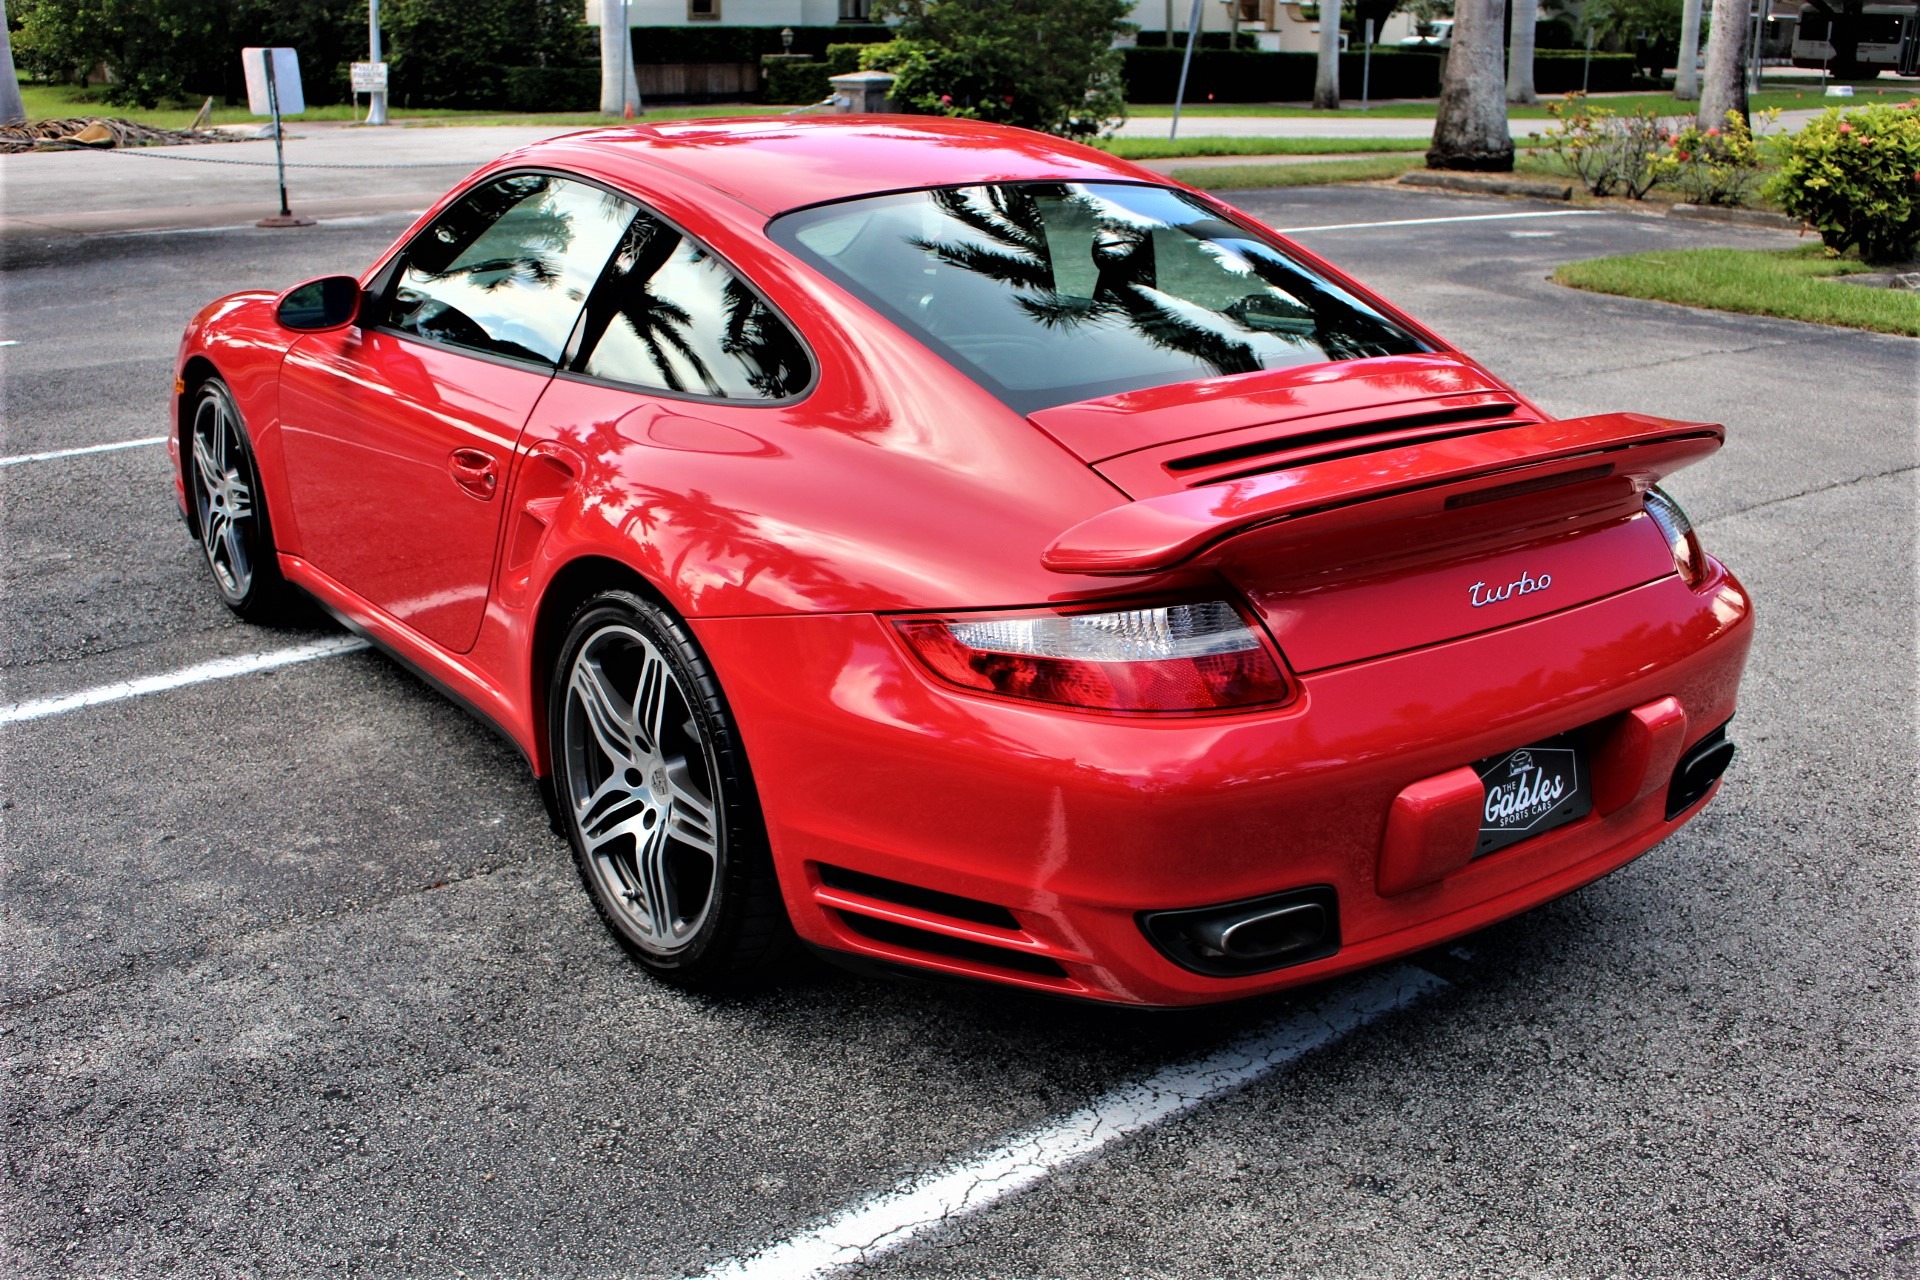 Used 2007 Porsche 911 Turbo for sale Sold at The Gables Sports Cars in Miami FL 33146 4